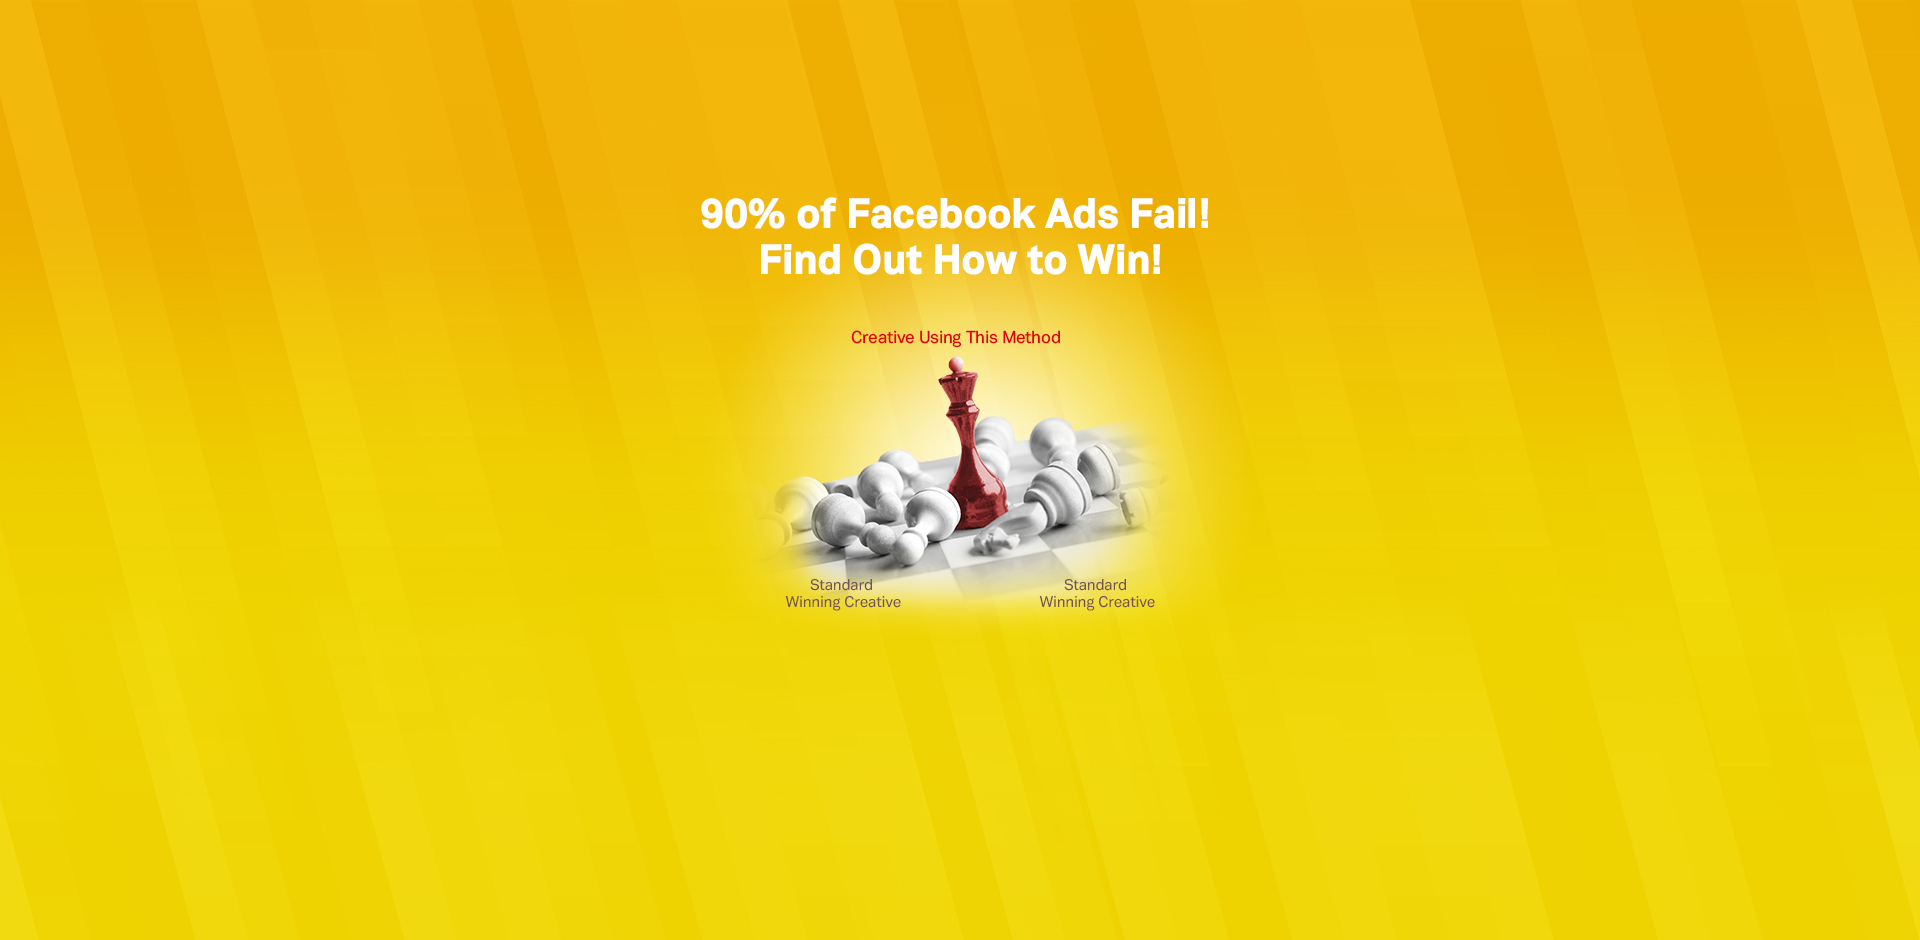 90% of Facebook Ads Fail! Find Out How to Win!